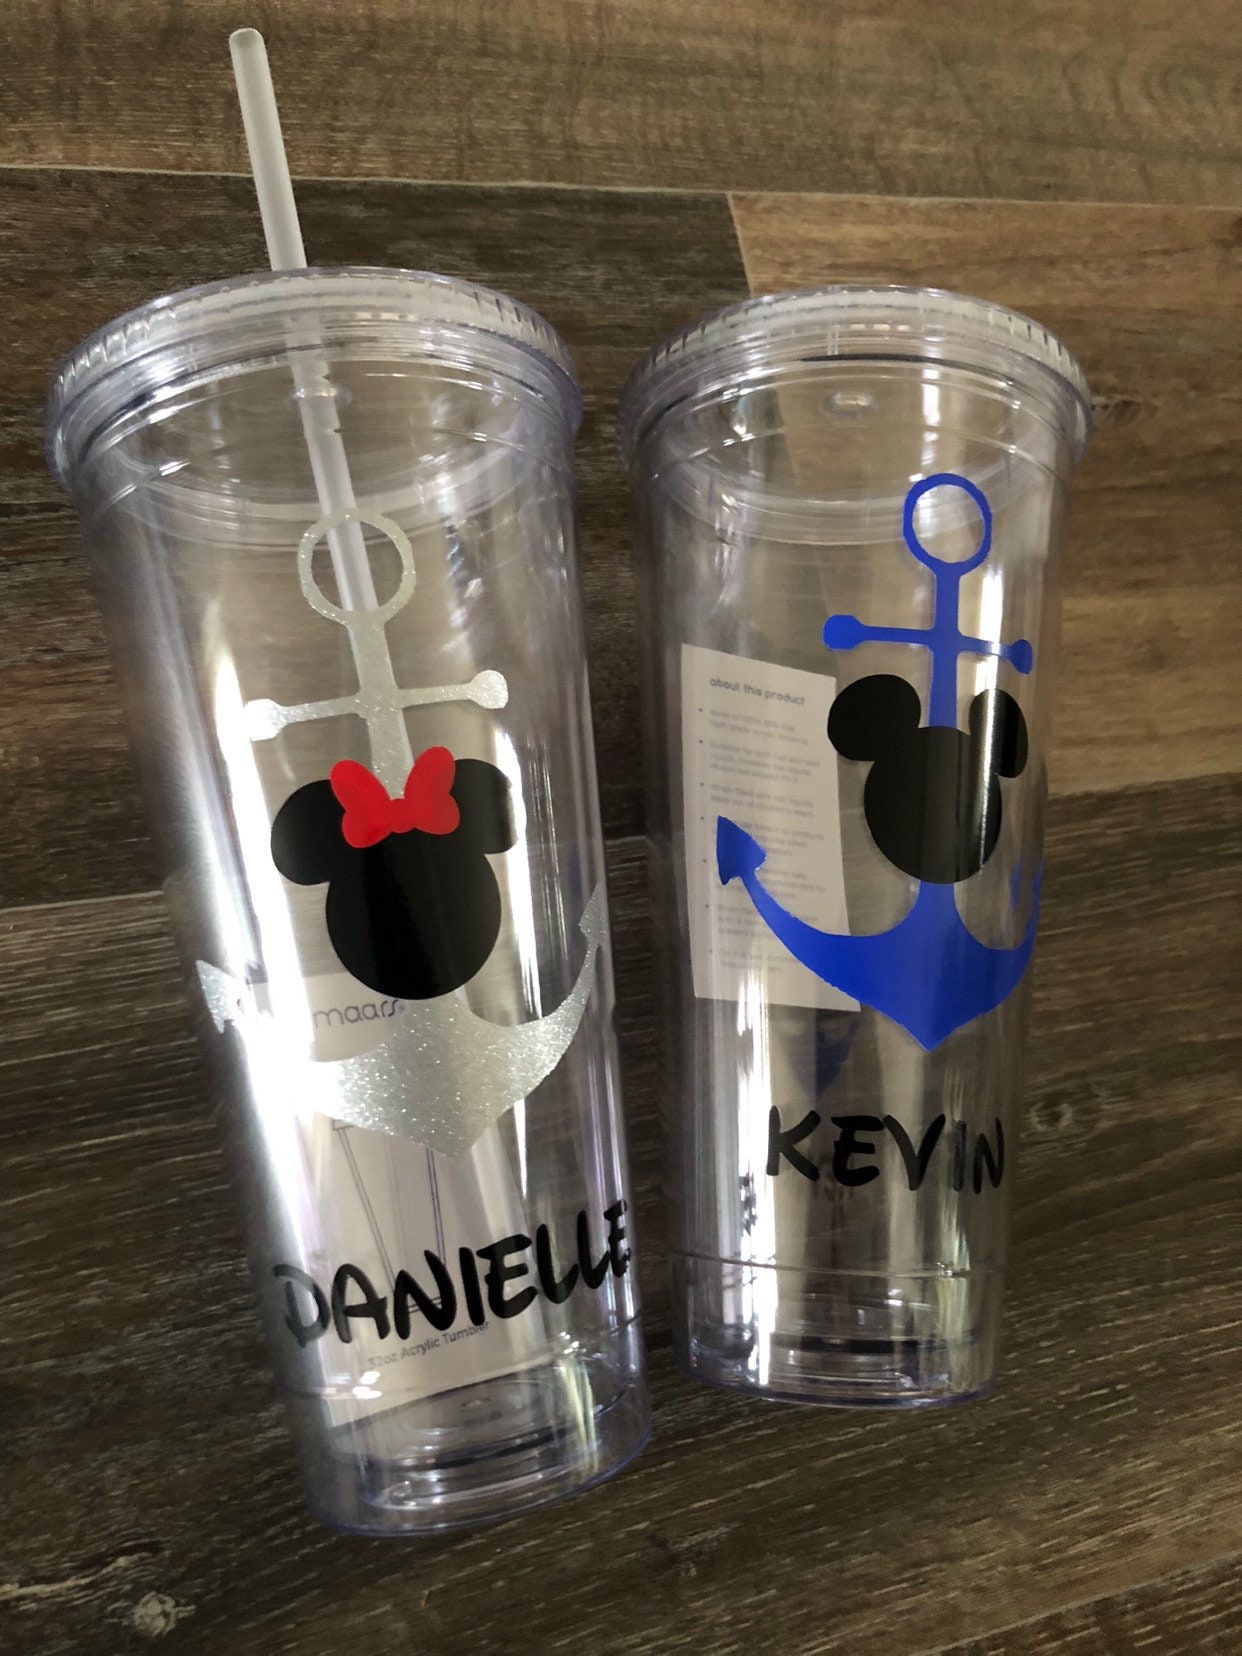 Kid Tumbler, Personalized Kids Tumbler, Stainless Steel Kids Cup, 12oz  Tumblers With Straw, Child Family Vacation Tumbler, Tumbler for Kids 